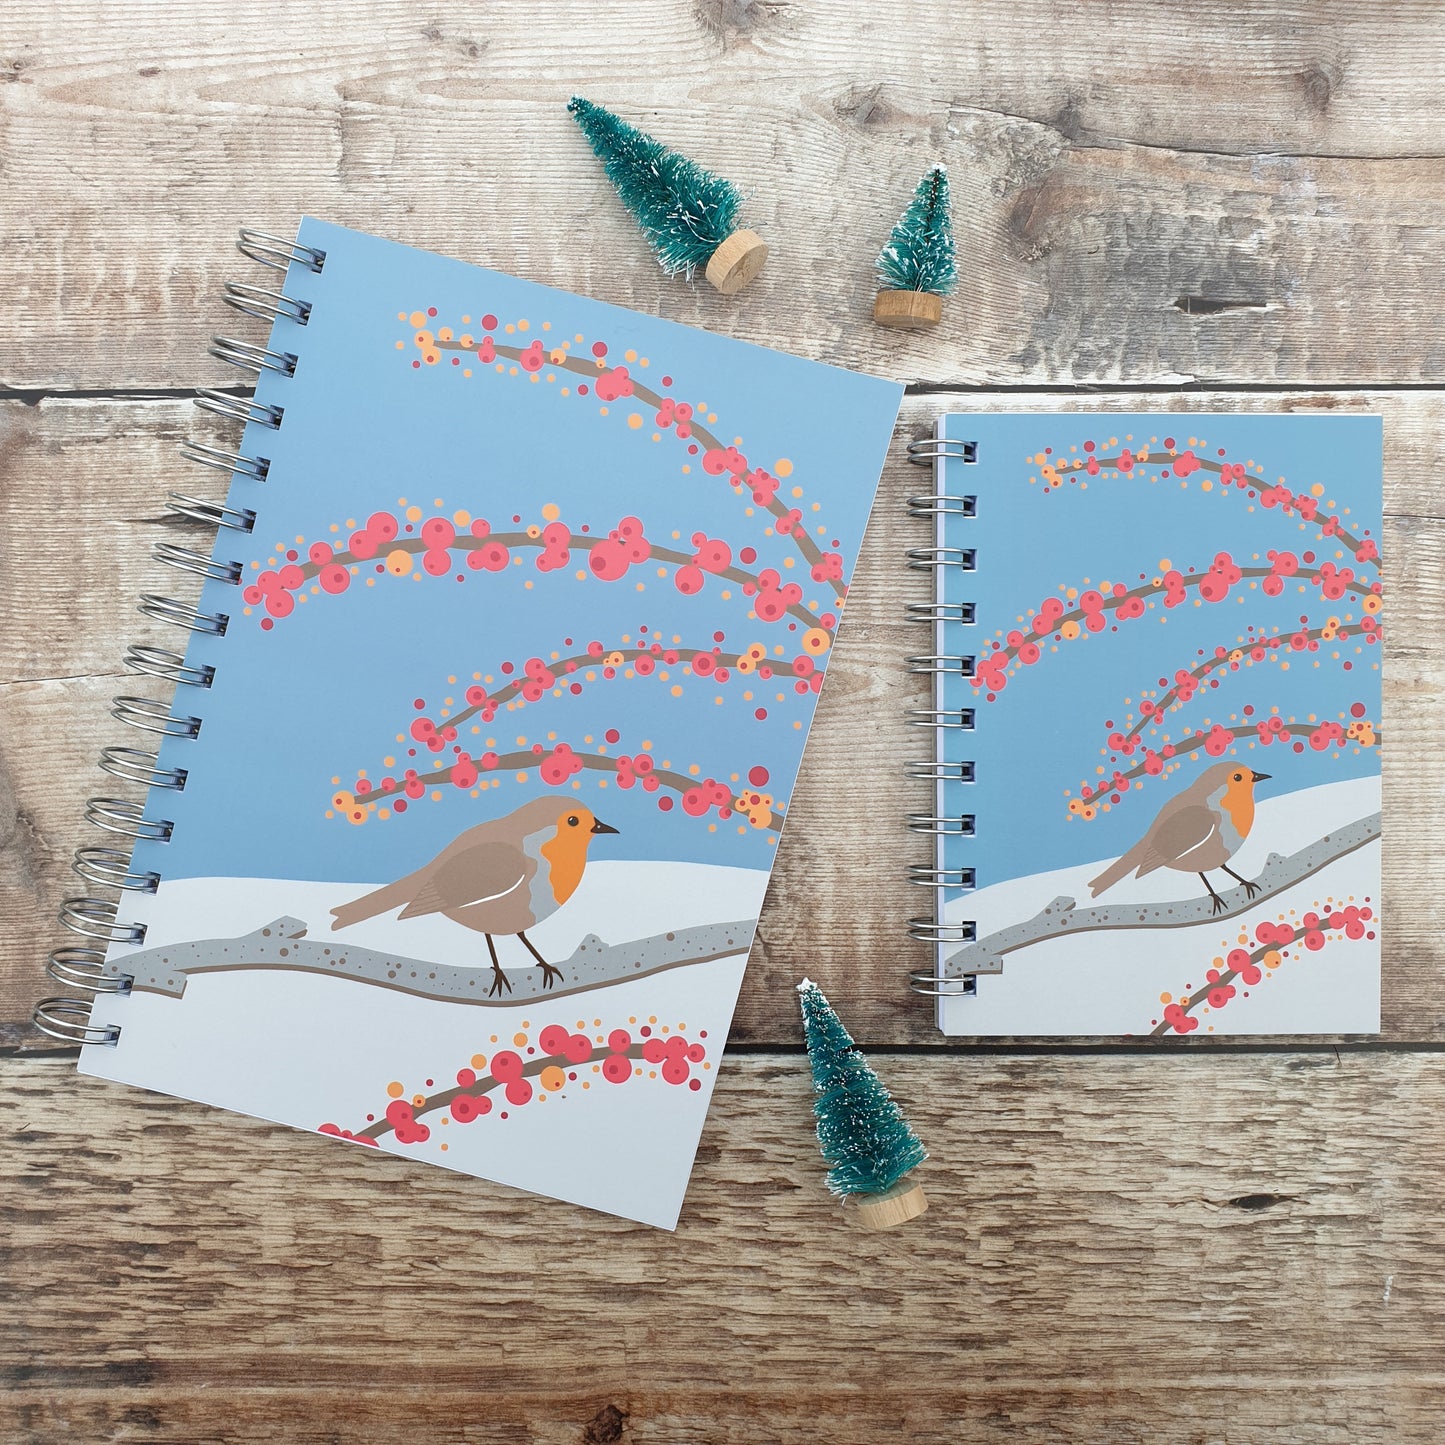 Robin in the Snow Notebooks